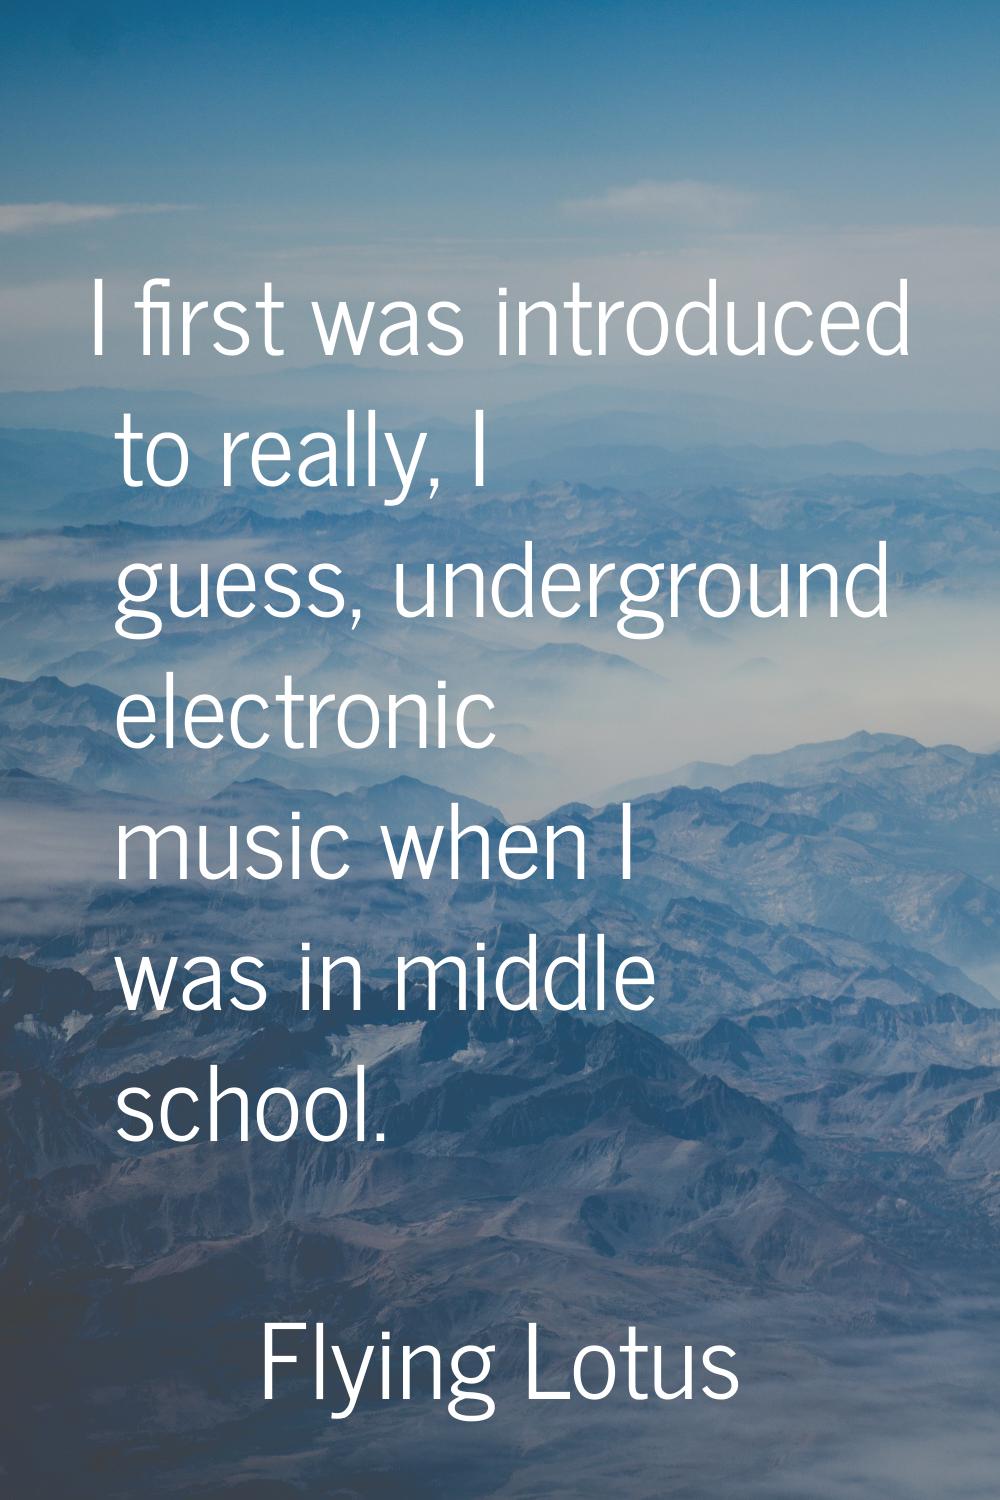 I first was introduced to really, I guess, underground electronic music when I was in middle school